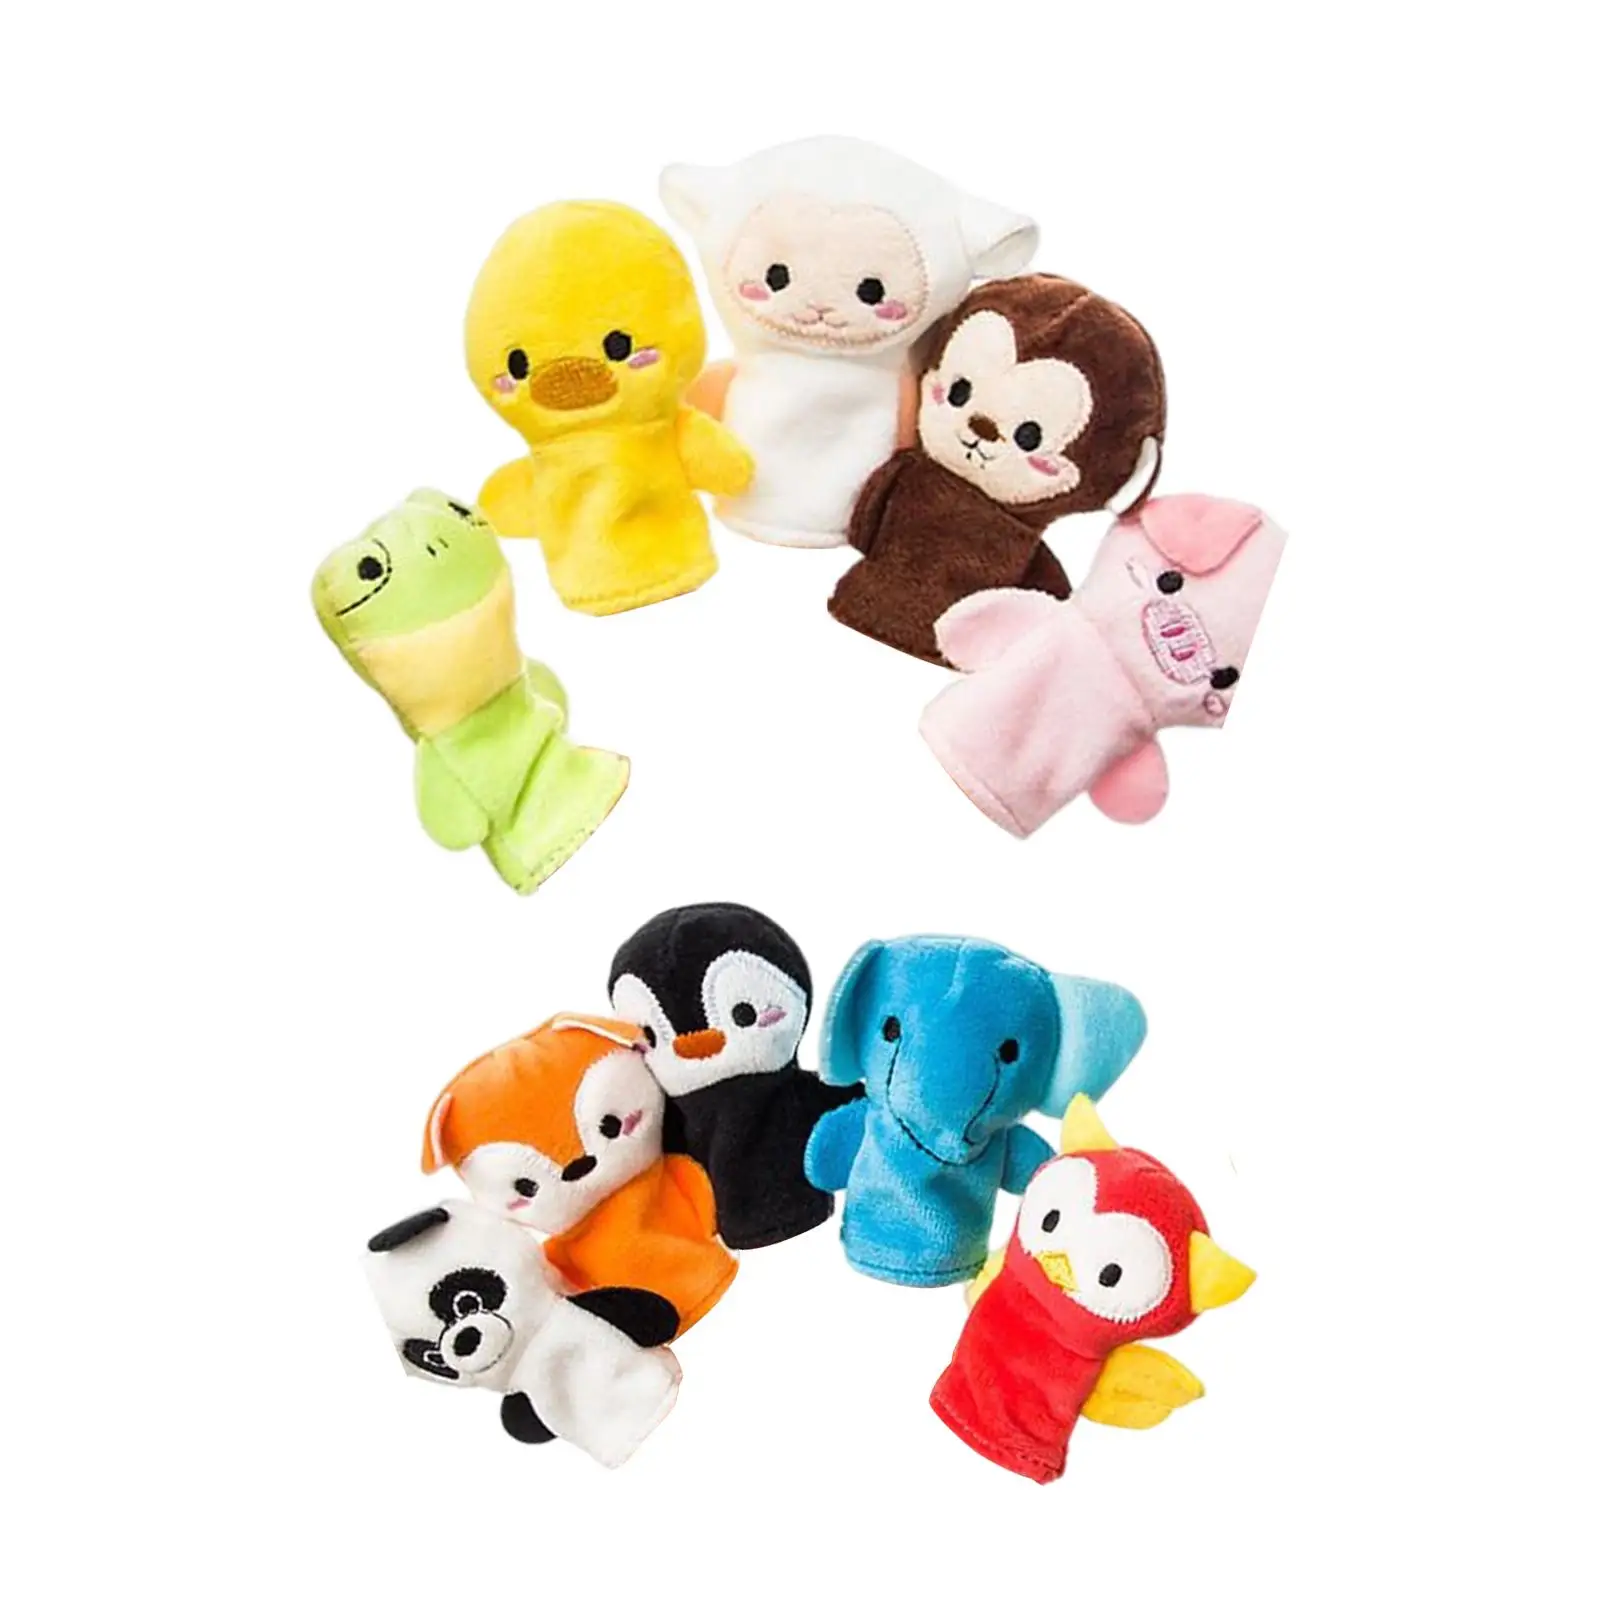 10 Pieces Novelty Family Finger Puppets Cloth Doll Role Play Baby Story Time